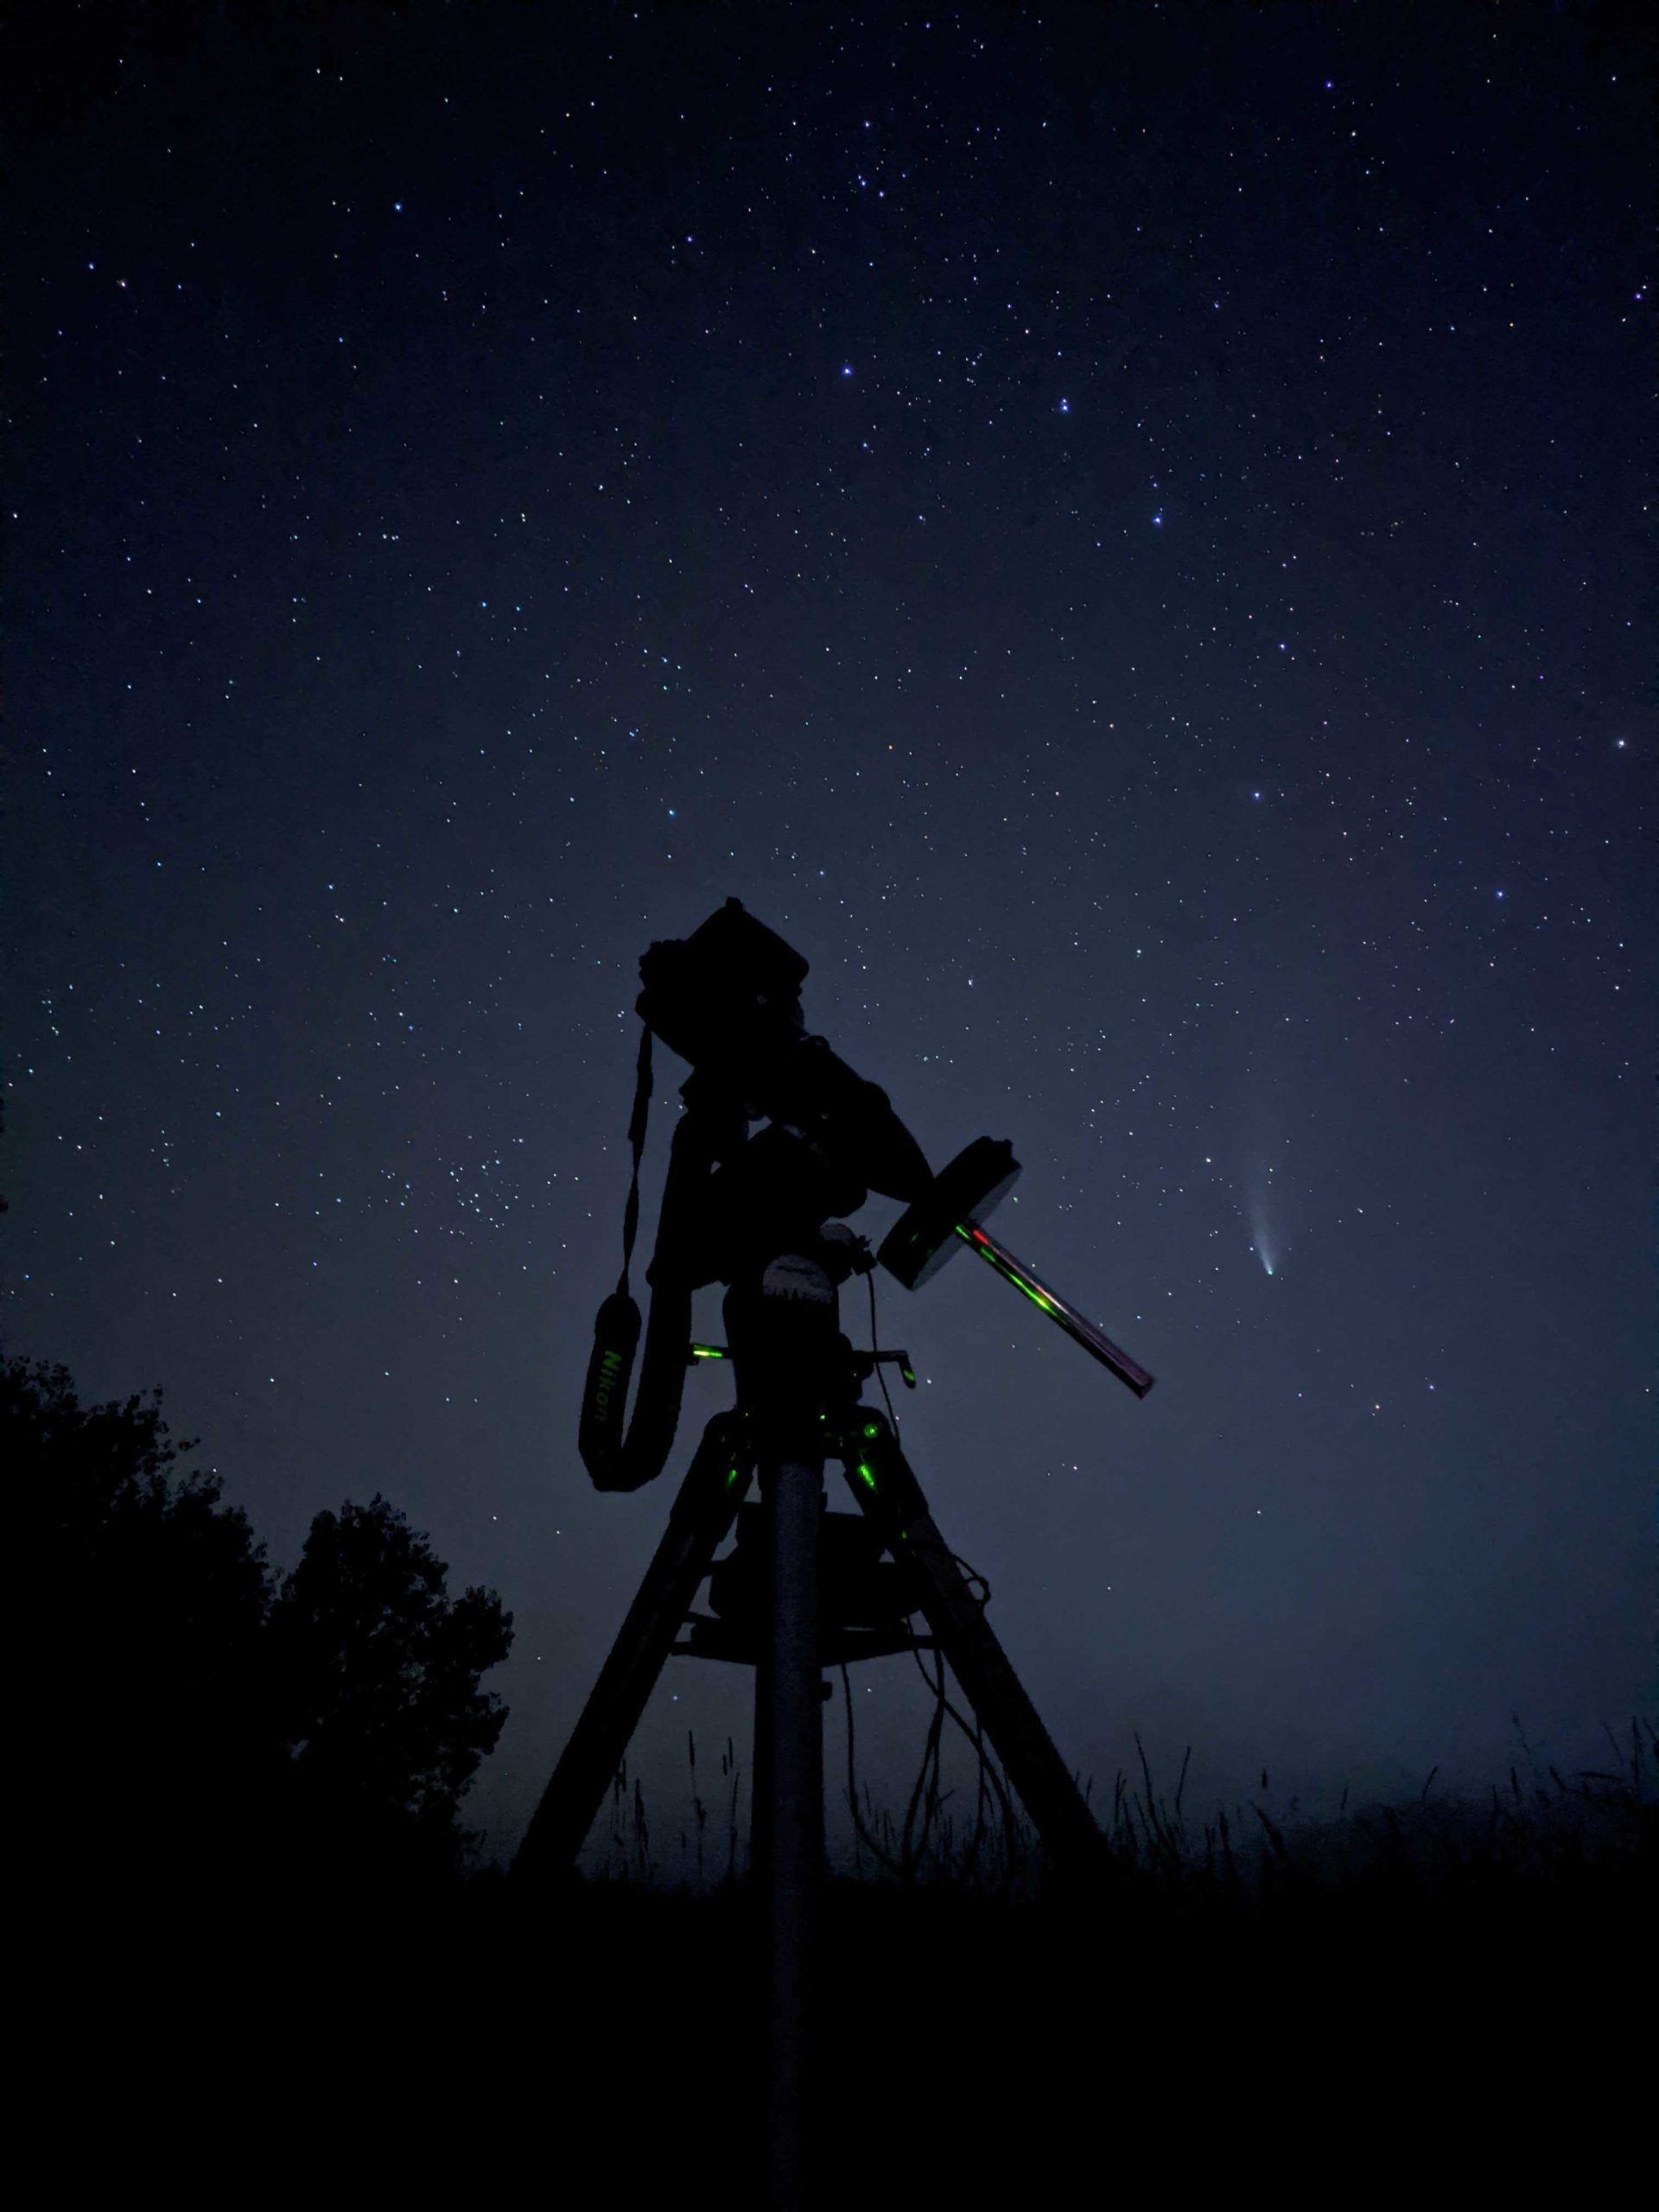 Night photography set up with Comet NEOWISE in the background.